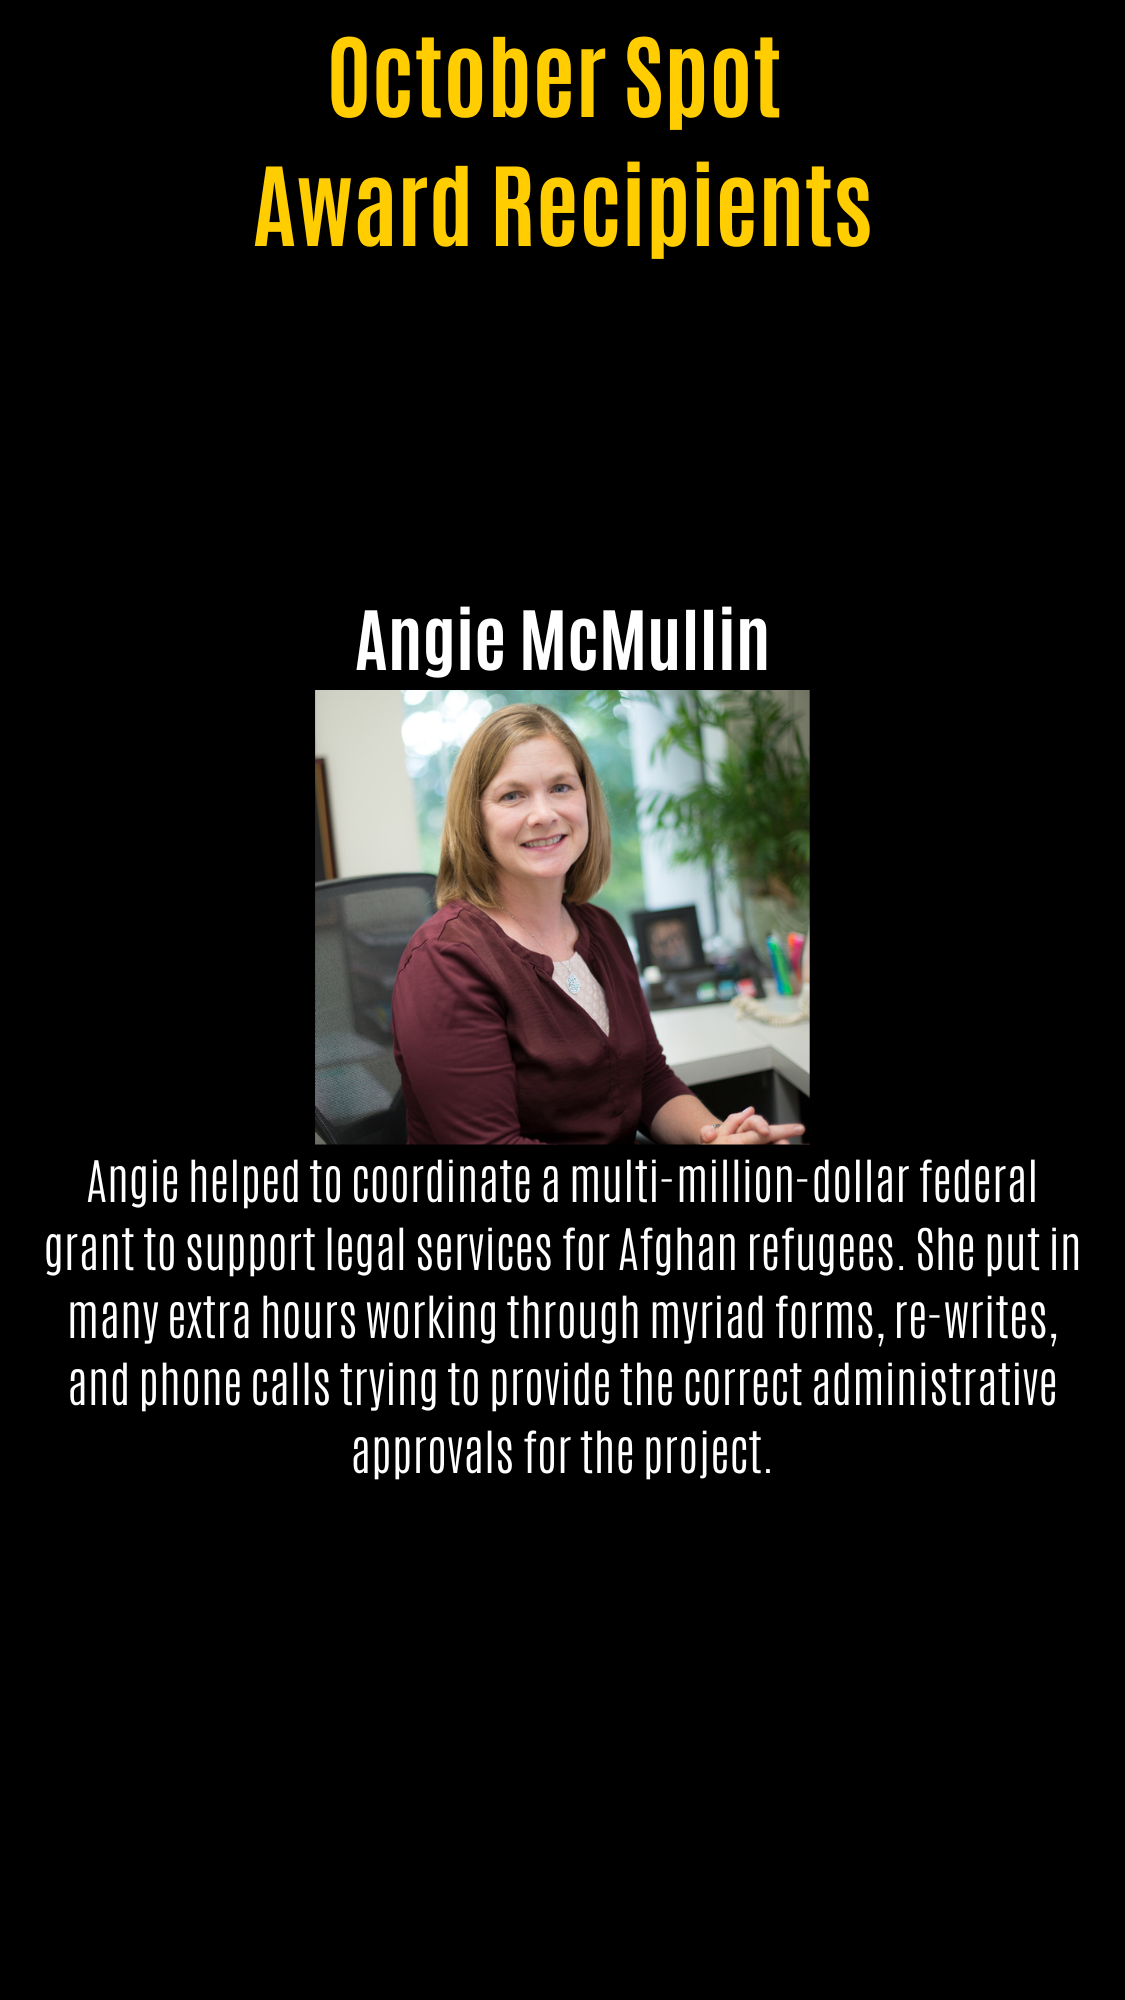 Angie McMullin